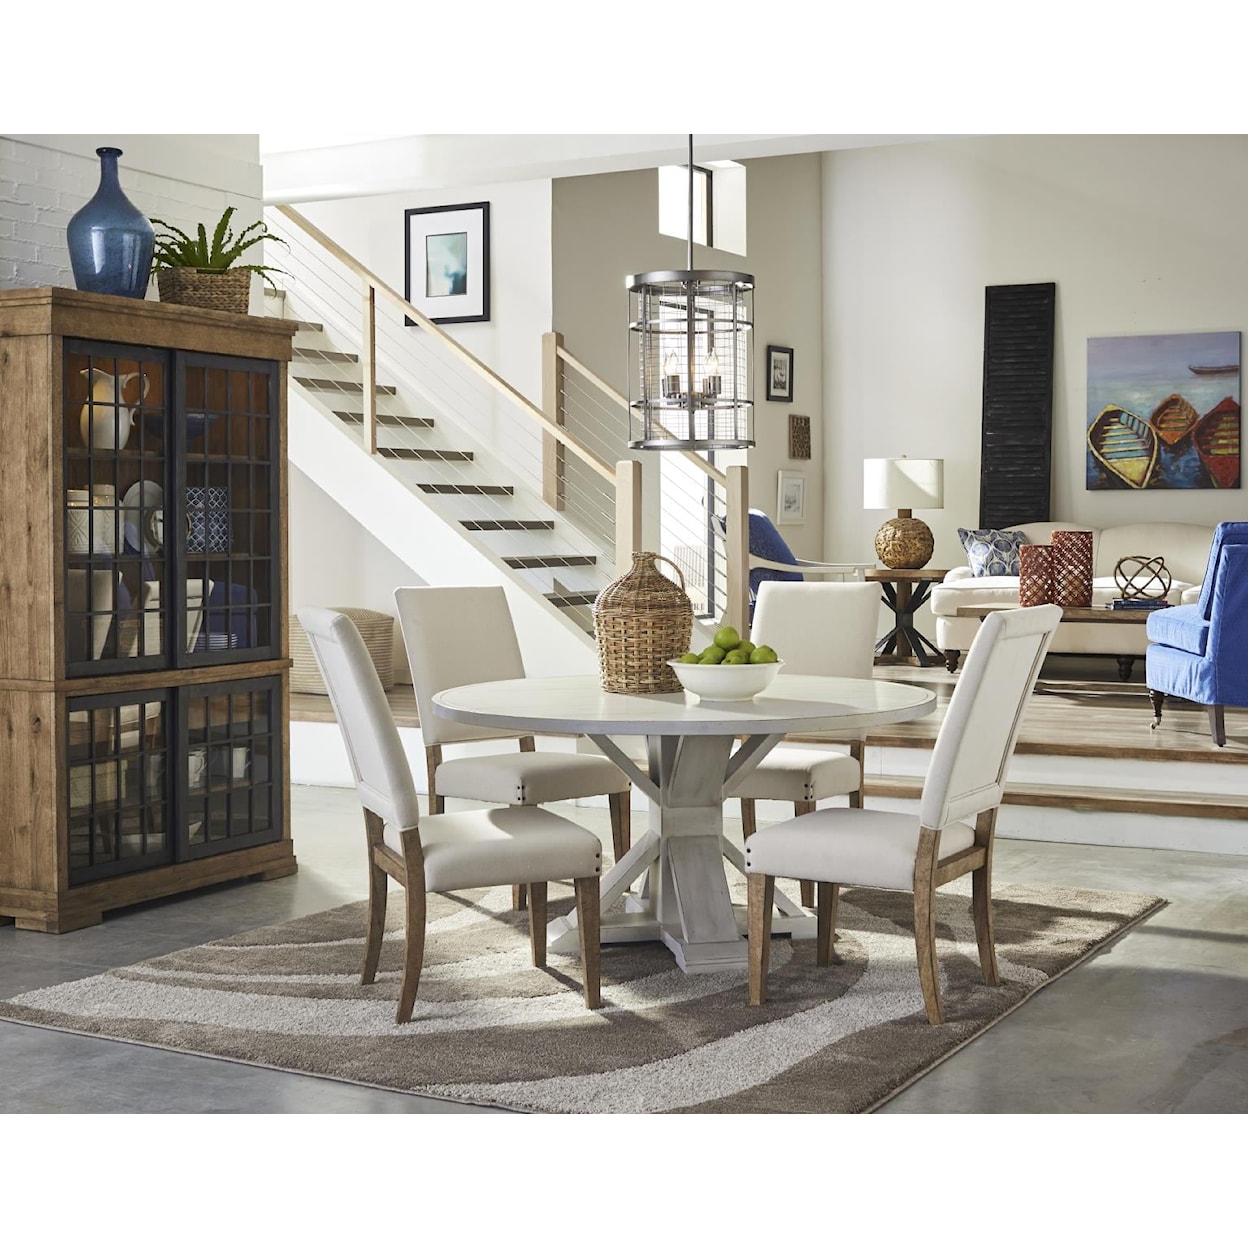 Trisha Yearwood Home Collection by Legacy Classic Coming Home Server